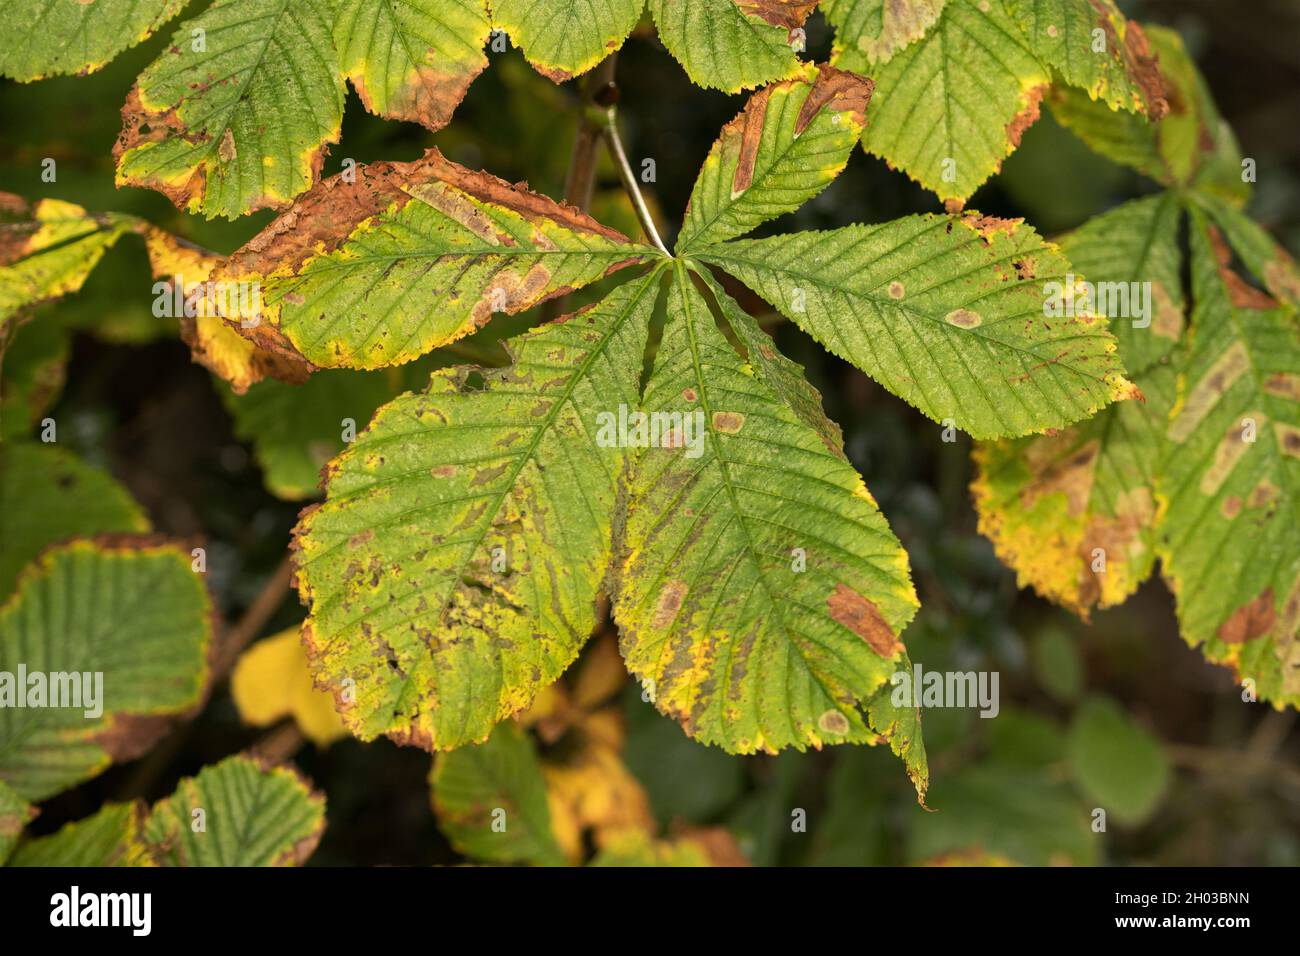 Leaf Blotch fungus was introduced from North America a century ago. The fungal infection starts the tree foliage to yellow early in autumn. This makes Stock Photo